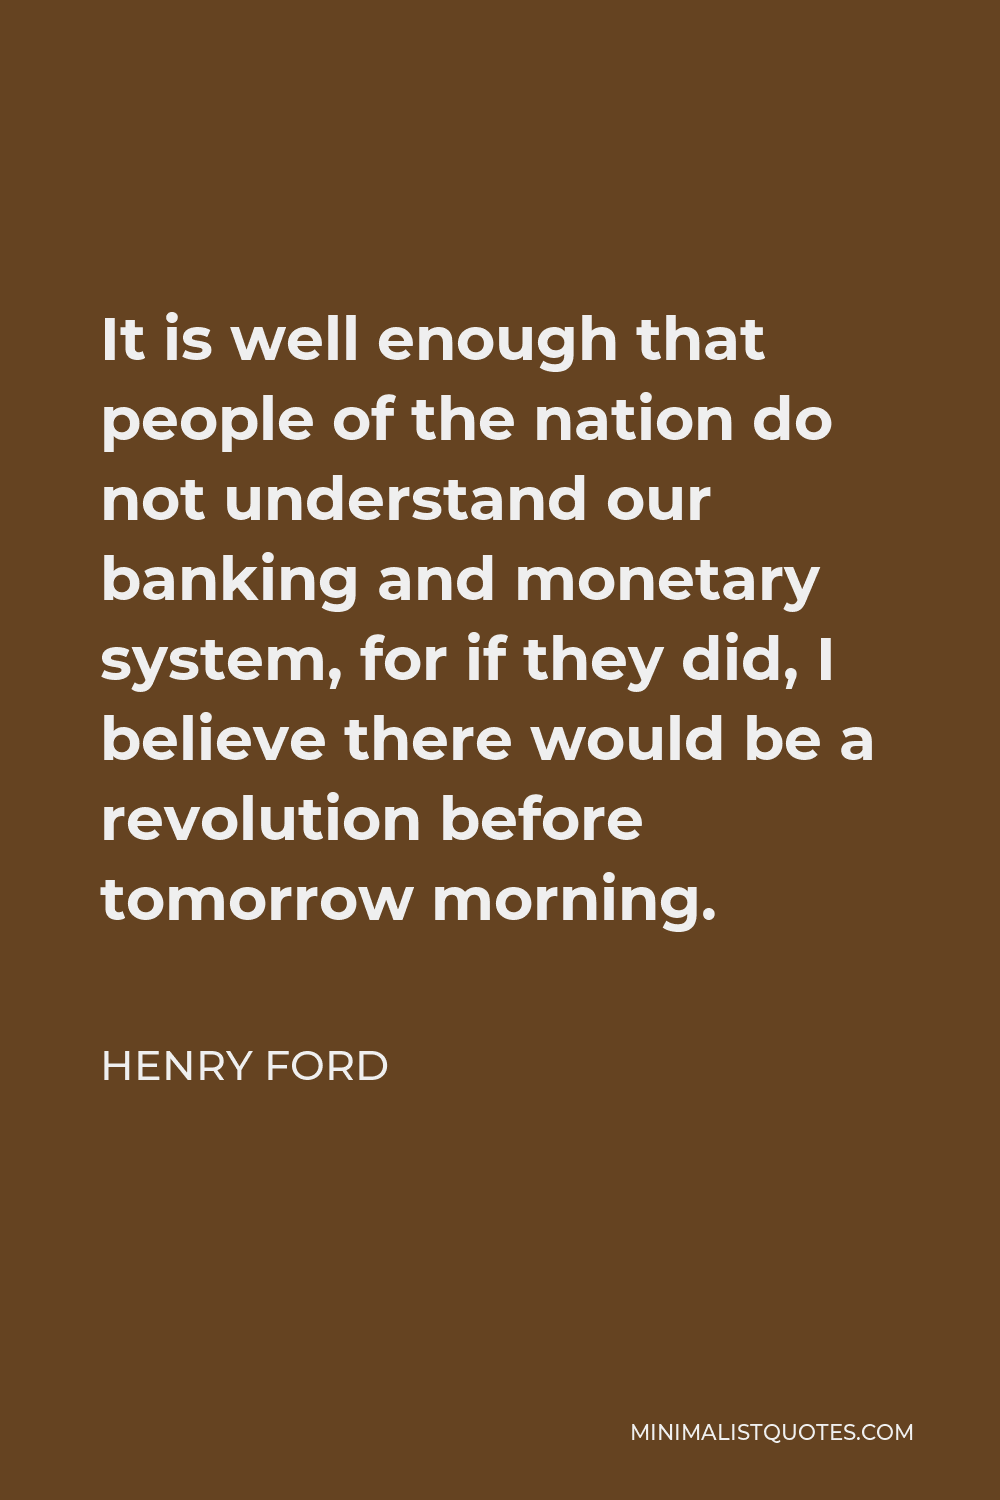 Henry Ford Quote - It is well enough that people of the nation do not understand our banking and monetary system, for if they did, I believe there would be a revolution before tomorrow morning.